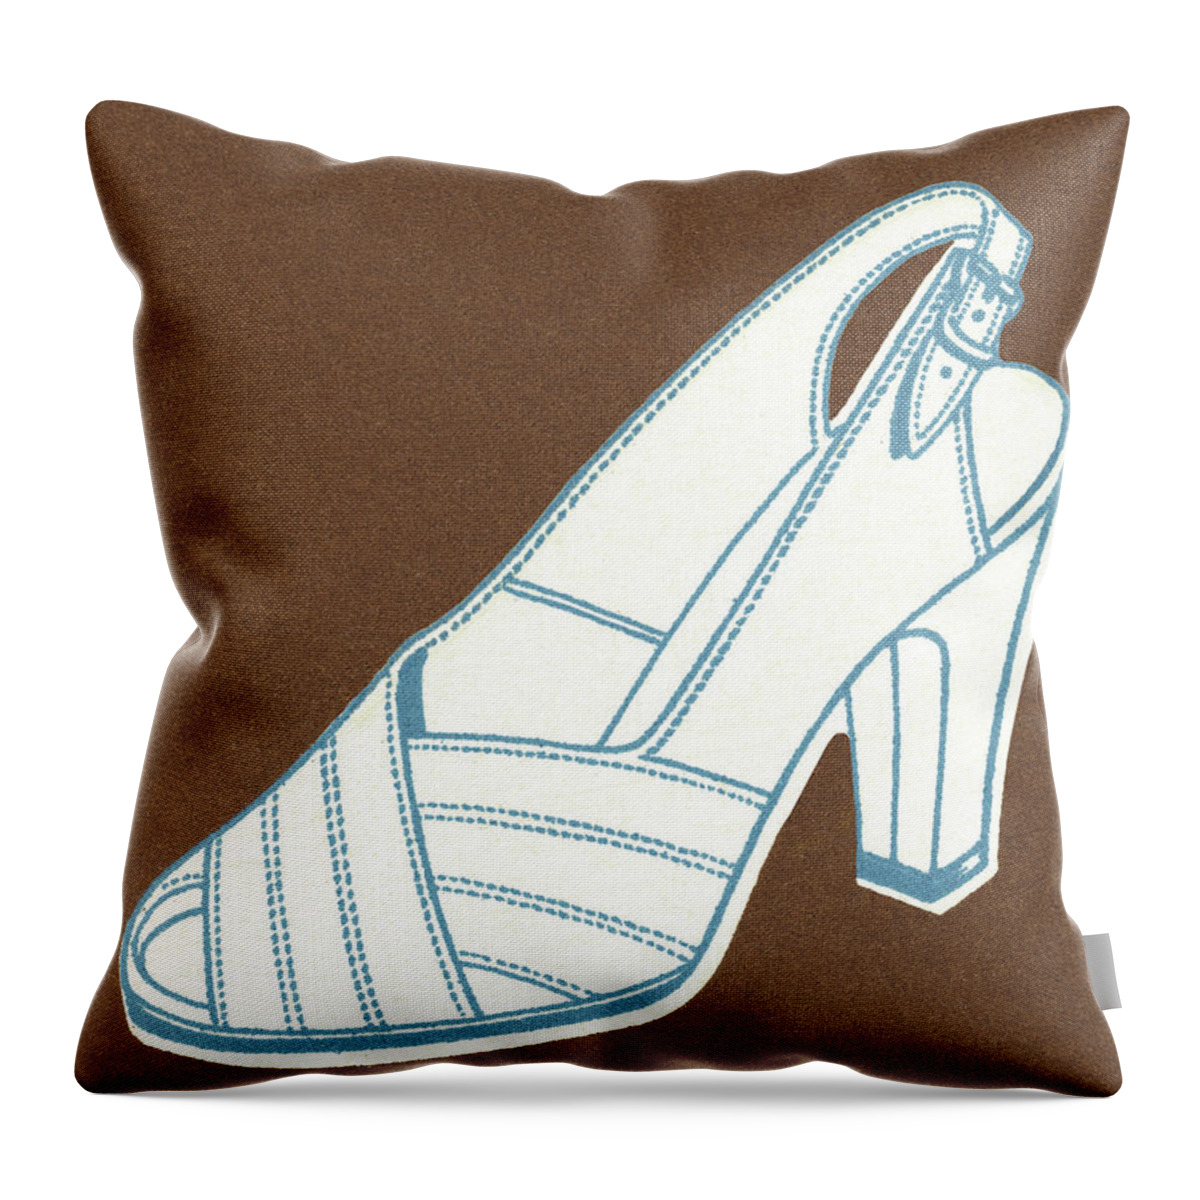 Brown Background Throw Pillow featuring the drawing Woman's Shoe by CSA Images